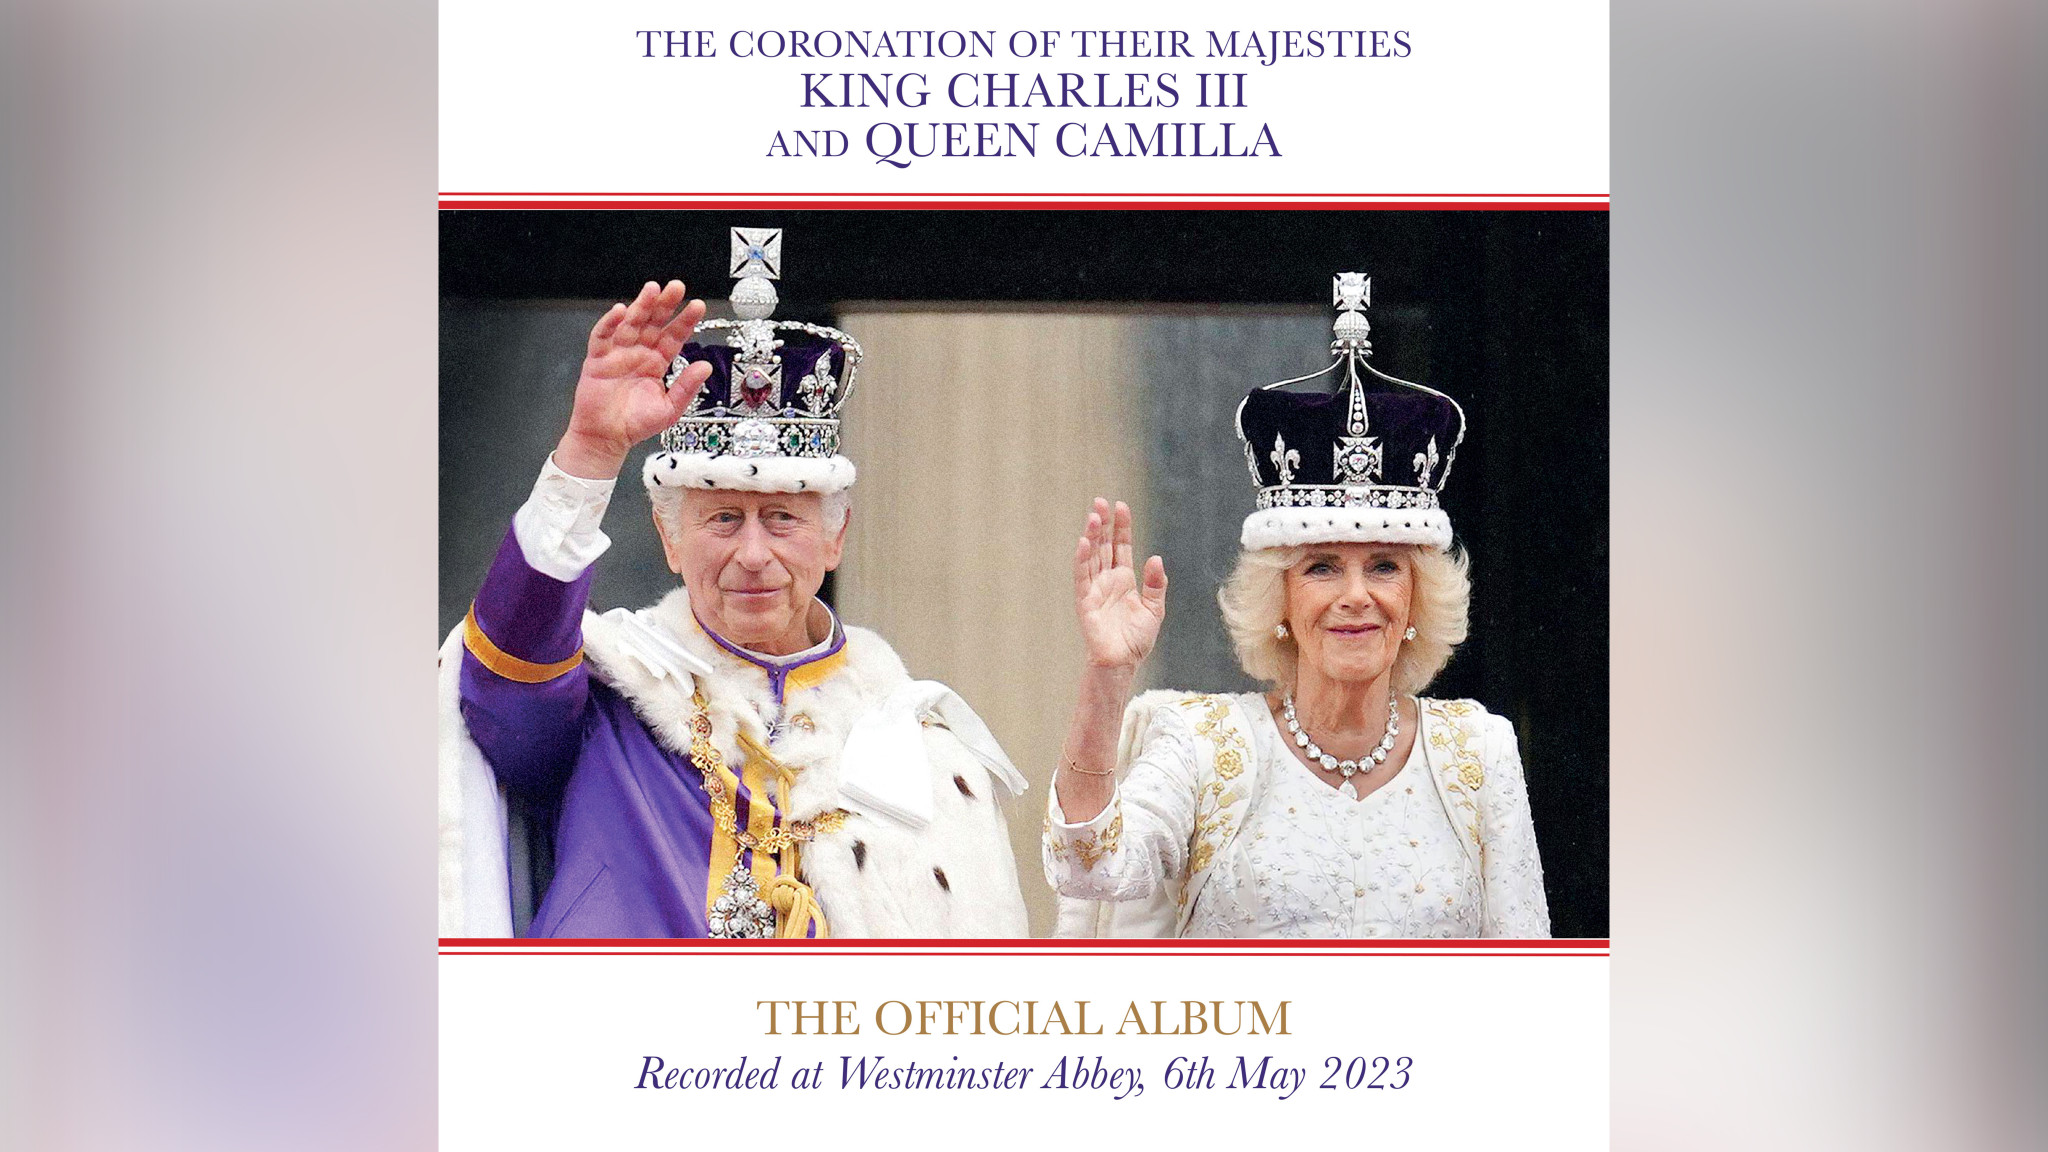 The Complete Recording of the Coronation: Available Globally Now!